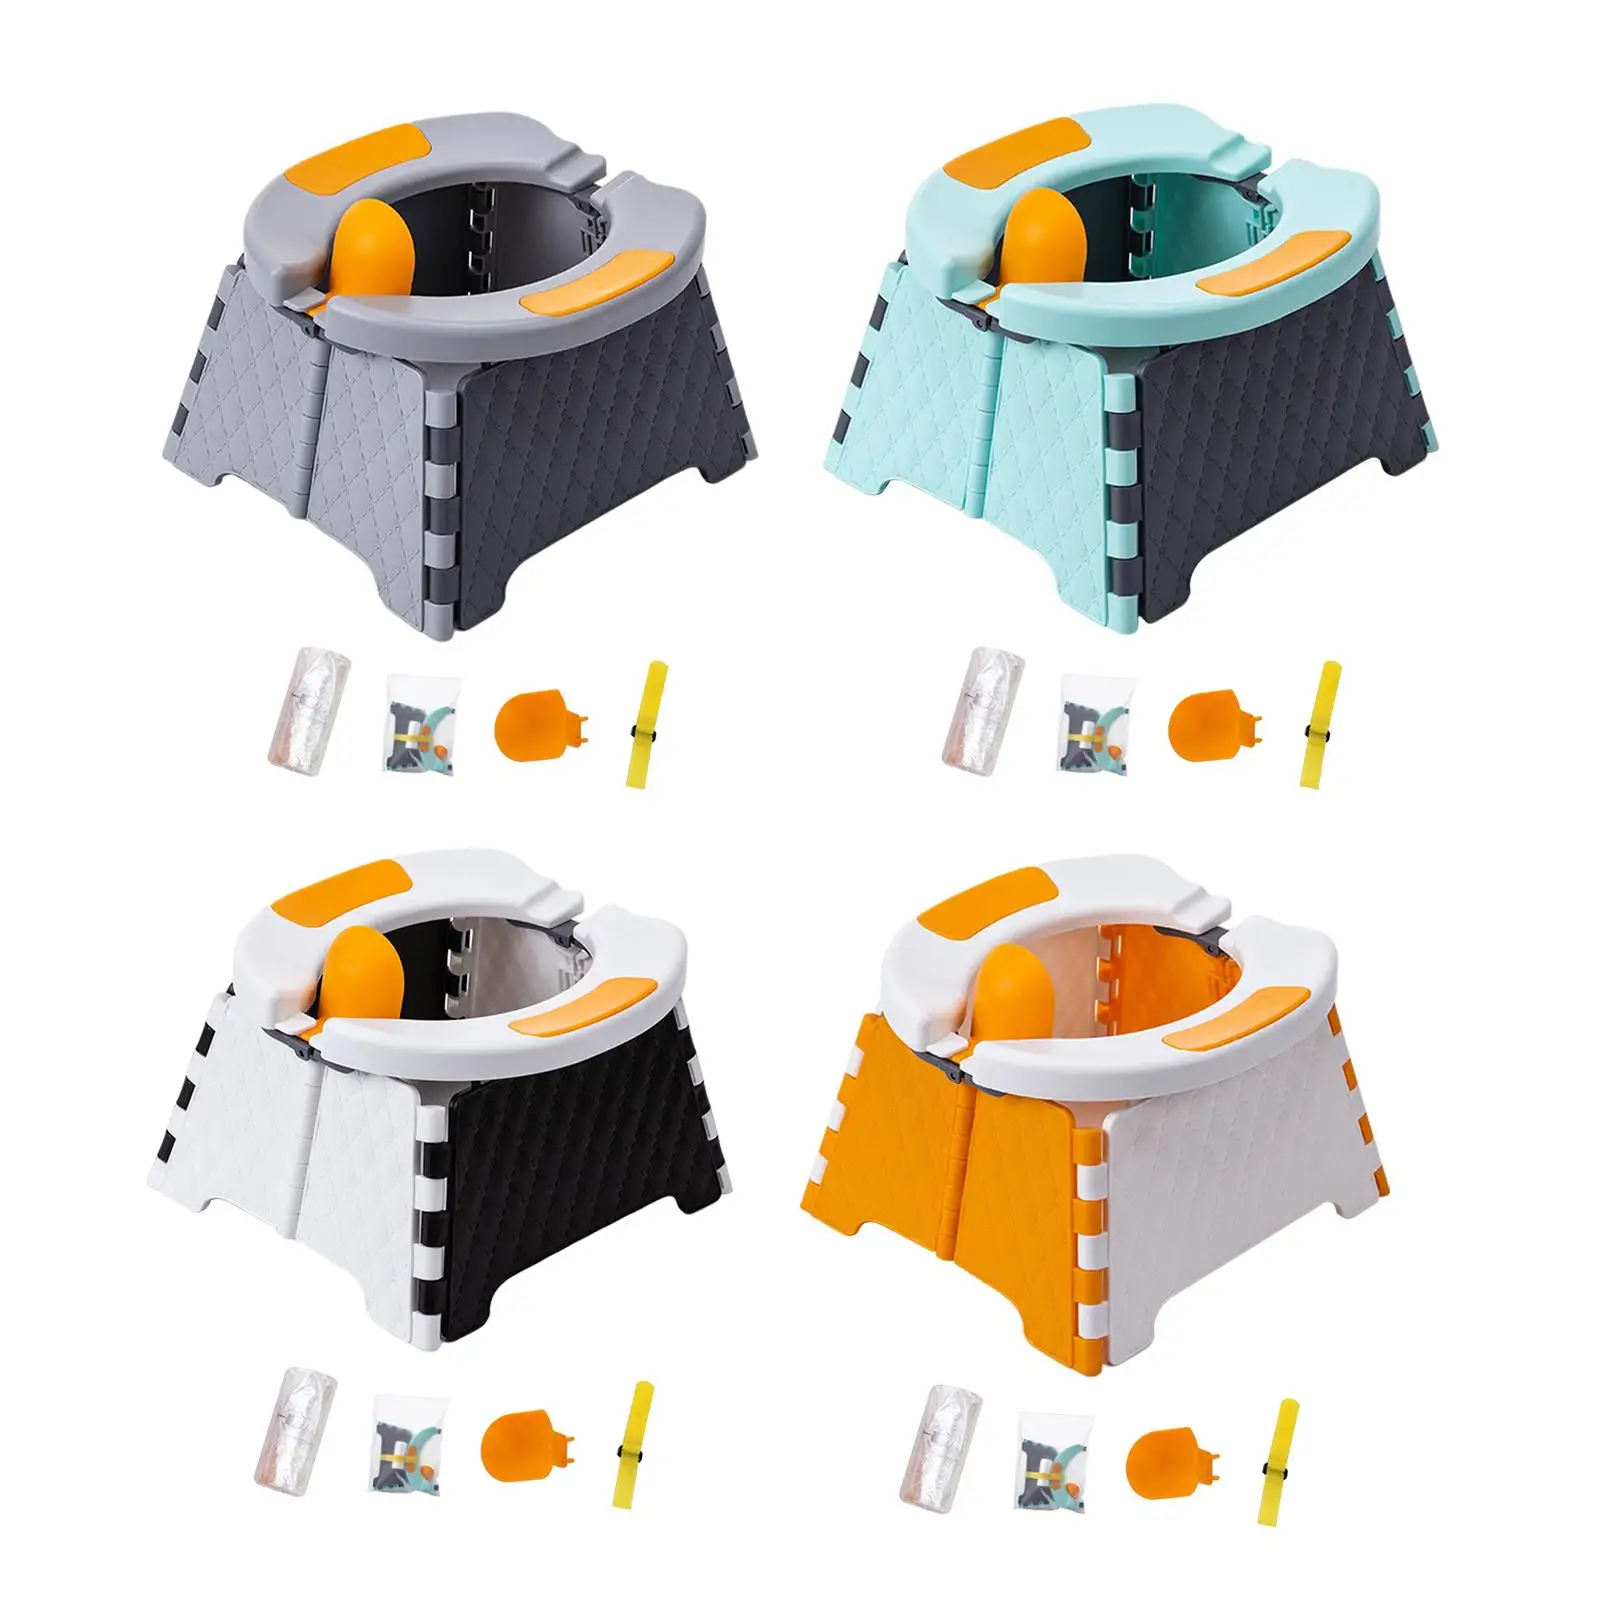 Portable Foldable Training Potty Seat for baby , for Camping, , Car Traveling etc